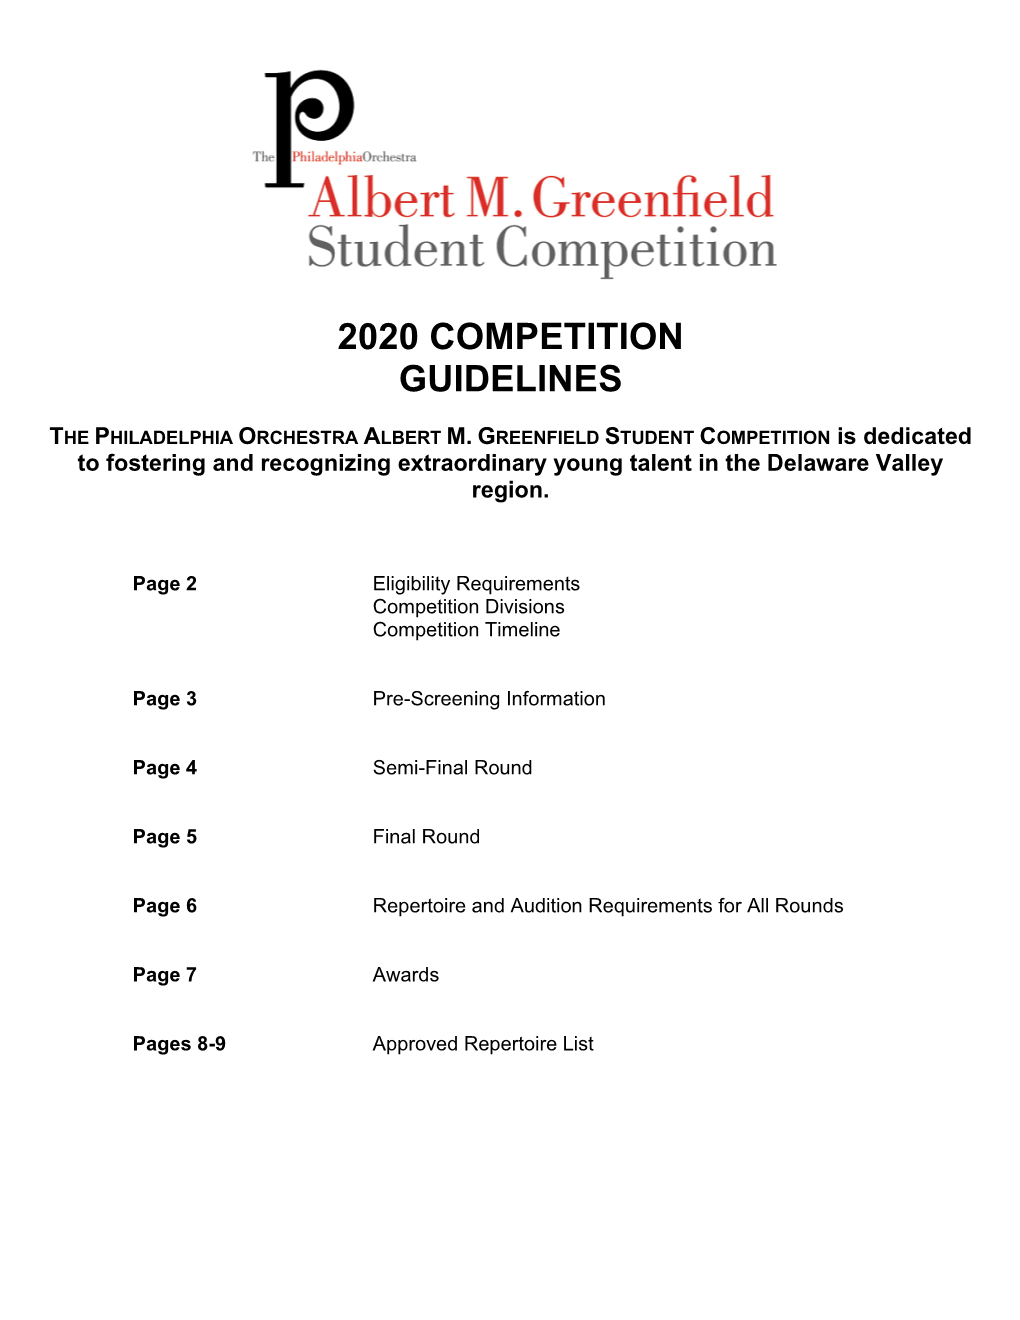 Philadelphia Orchestra Greenfield Student Competition Guidelines